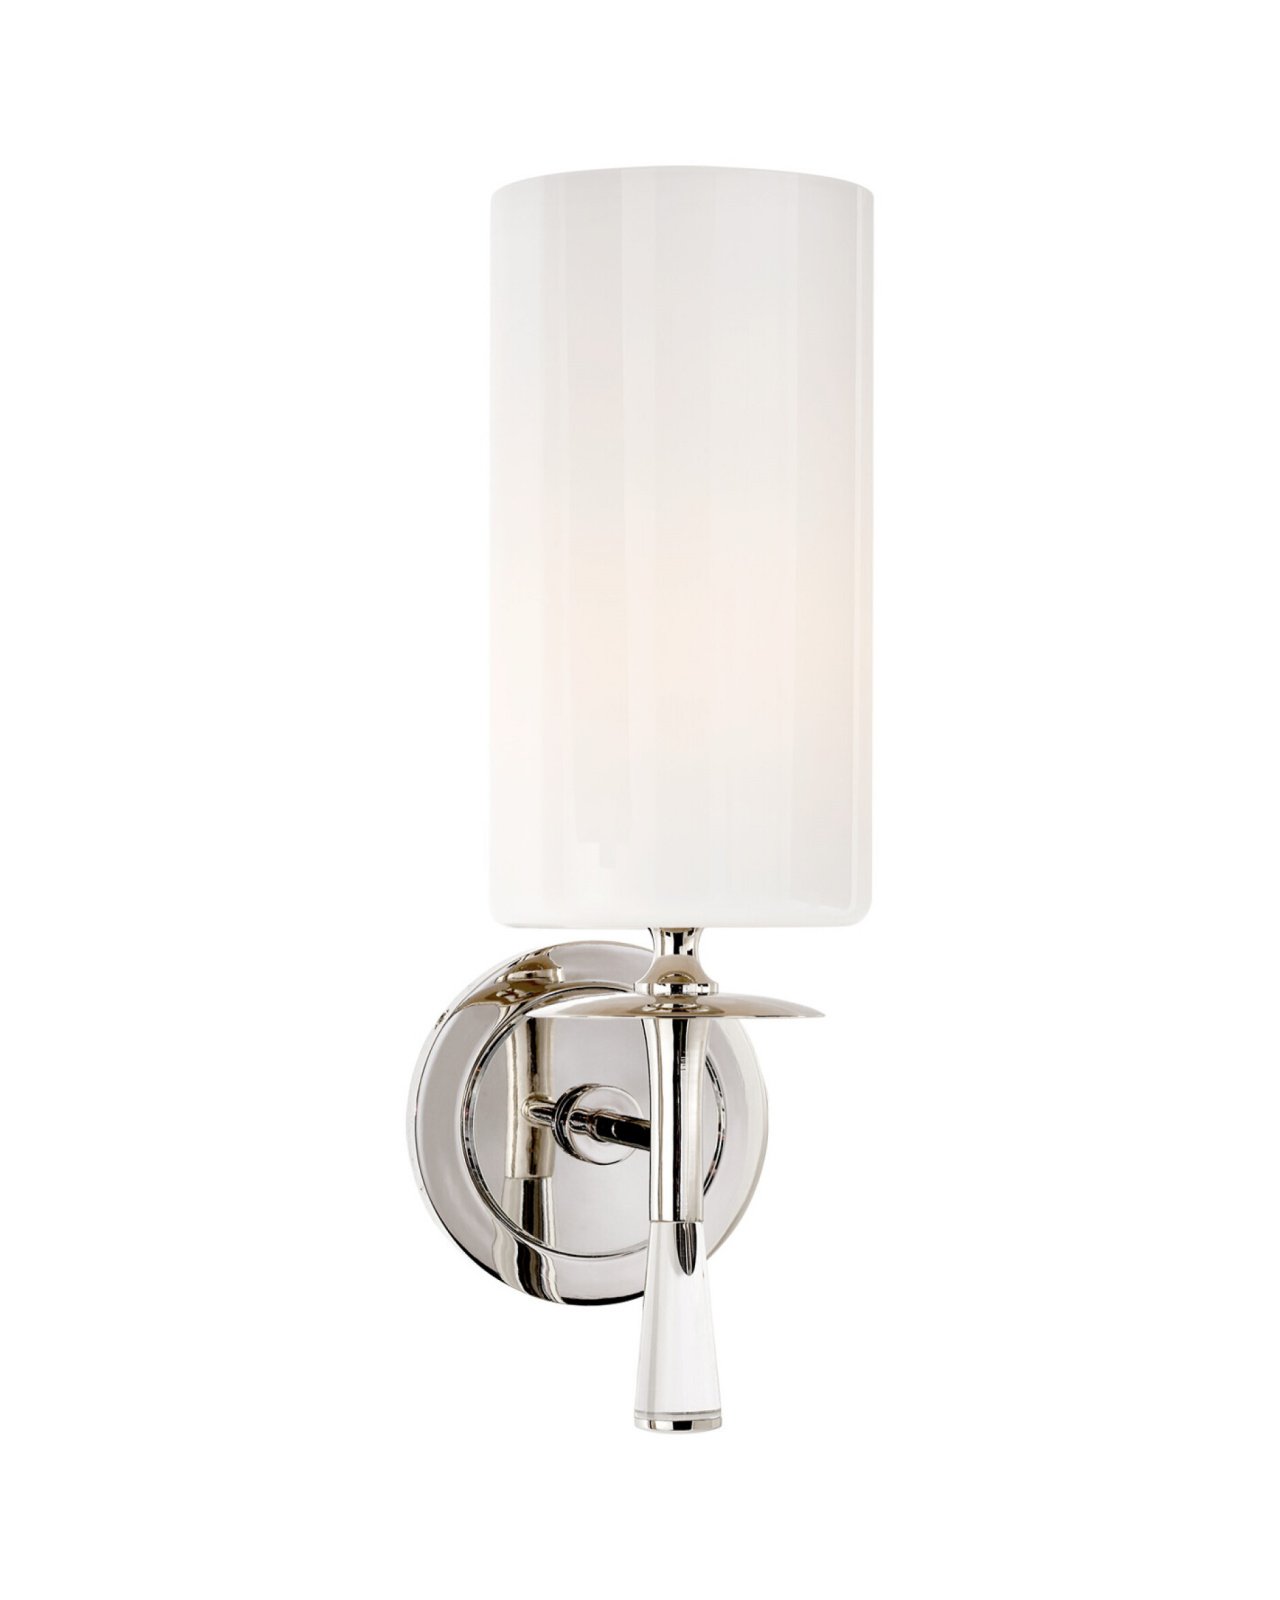 Drunmore Single Sconce Polished Nickel and Crystal/White